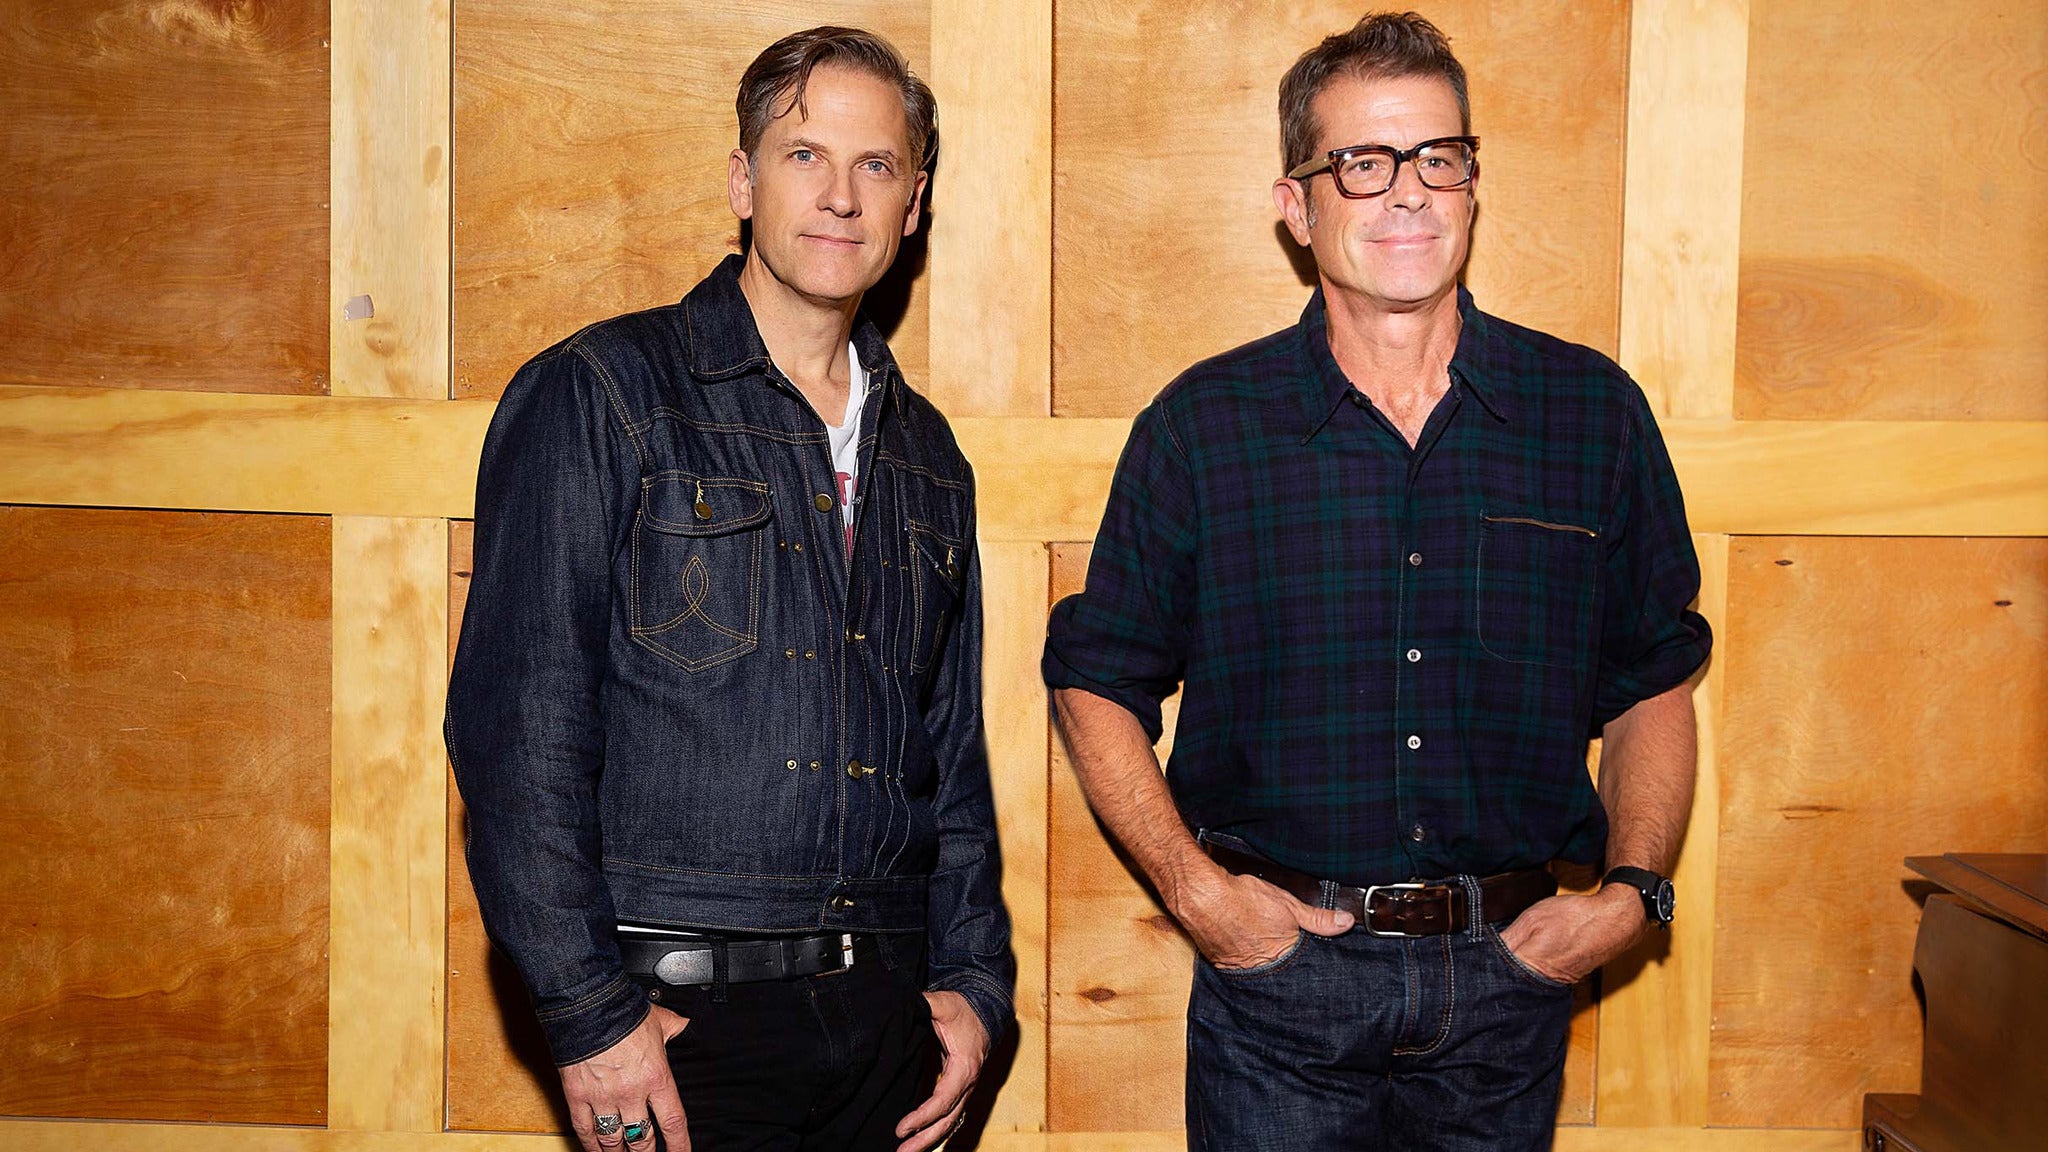 Calexico pre-sale password for early tickets in Seattle